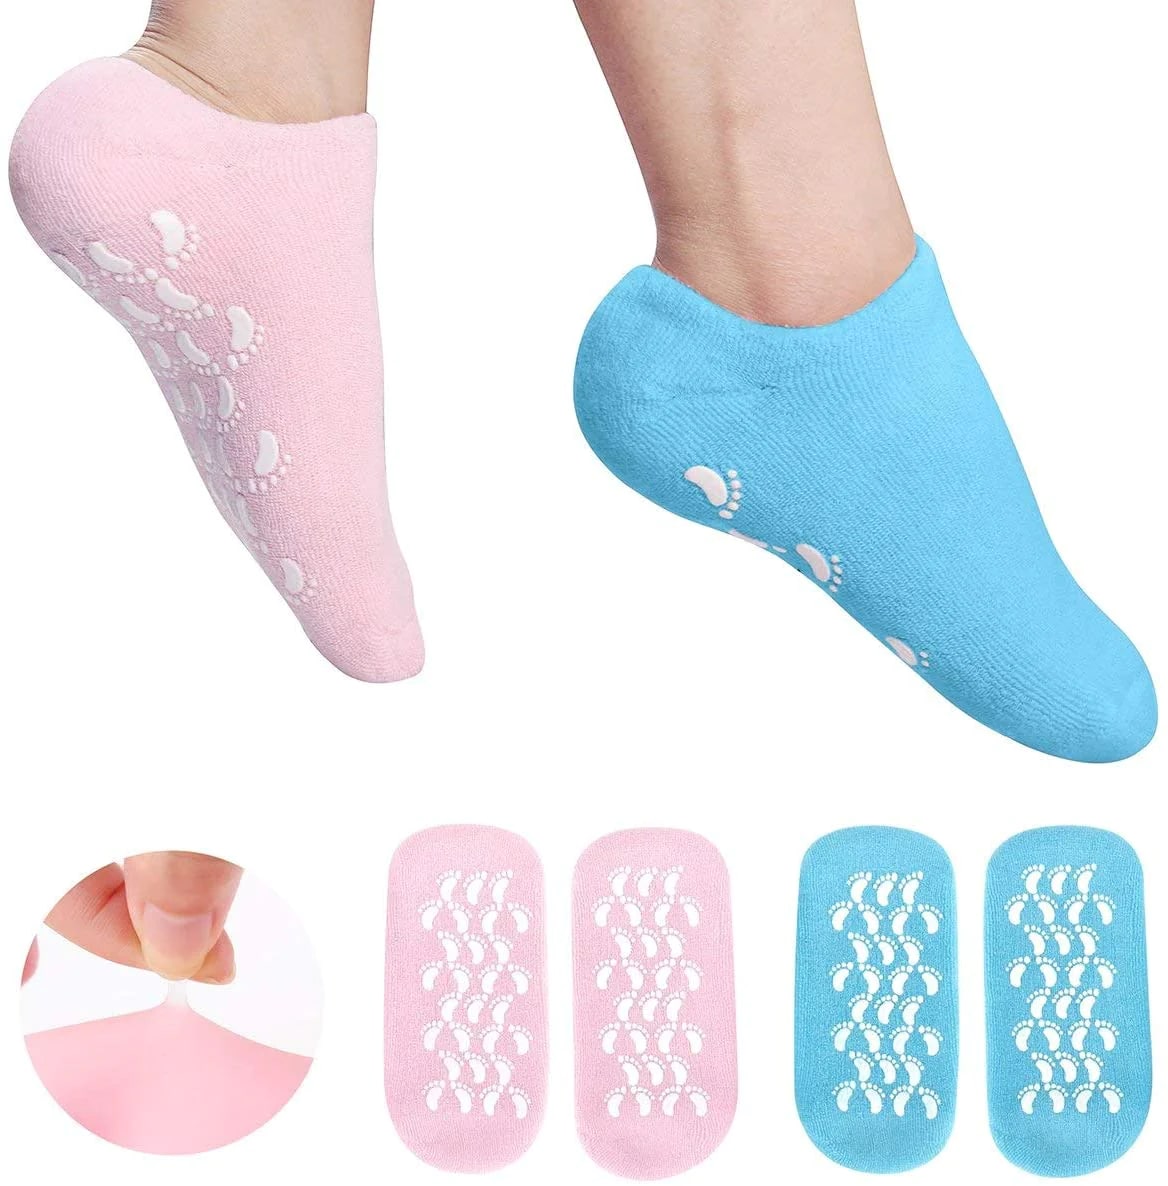 Cotton silicone socks with oils and vitamins from Al Samah